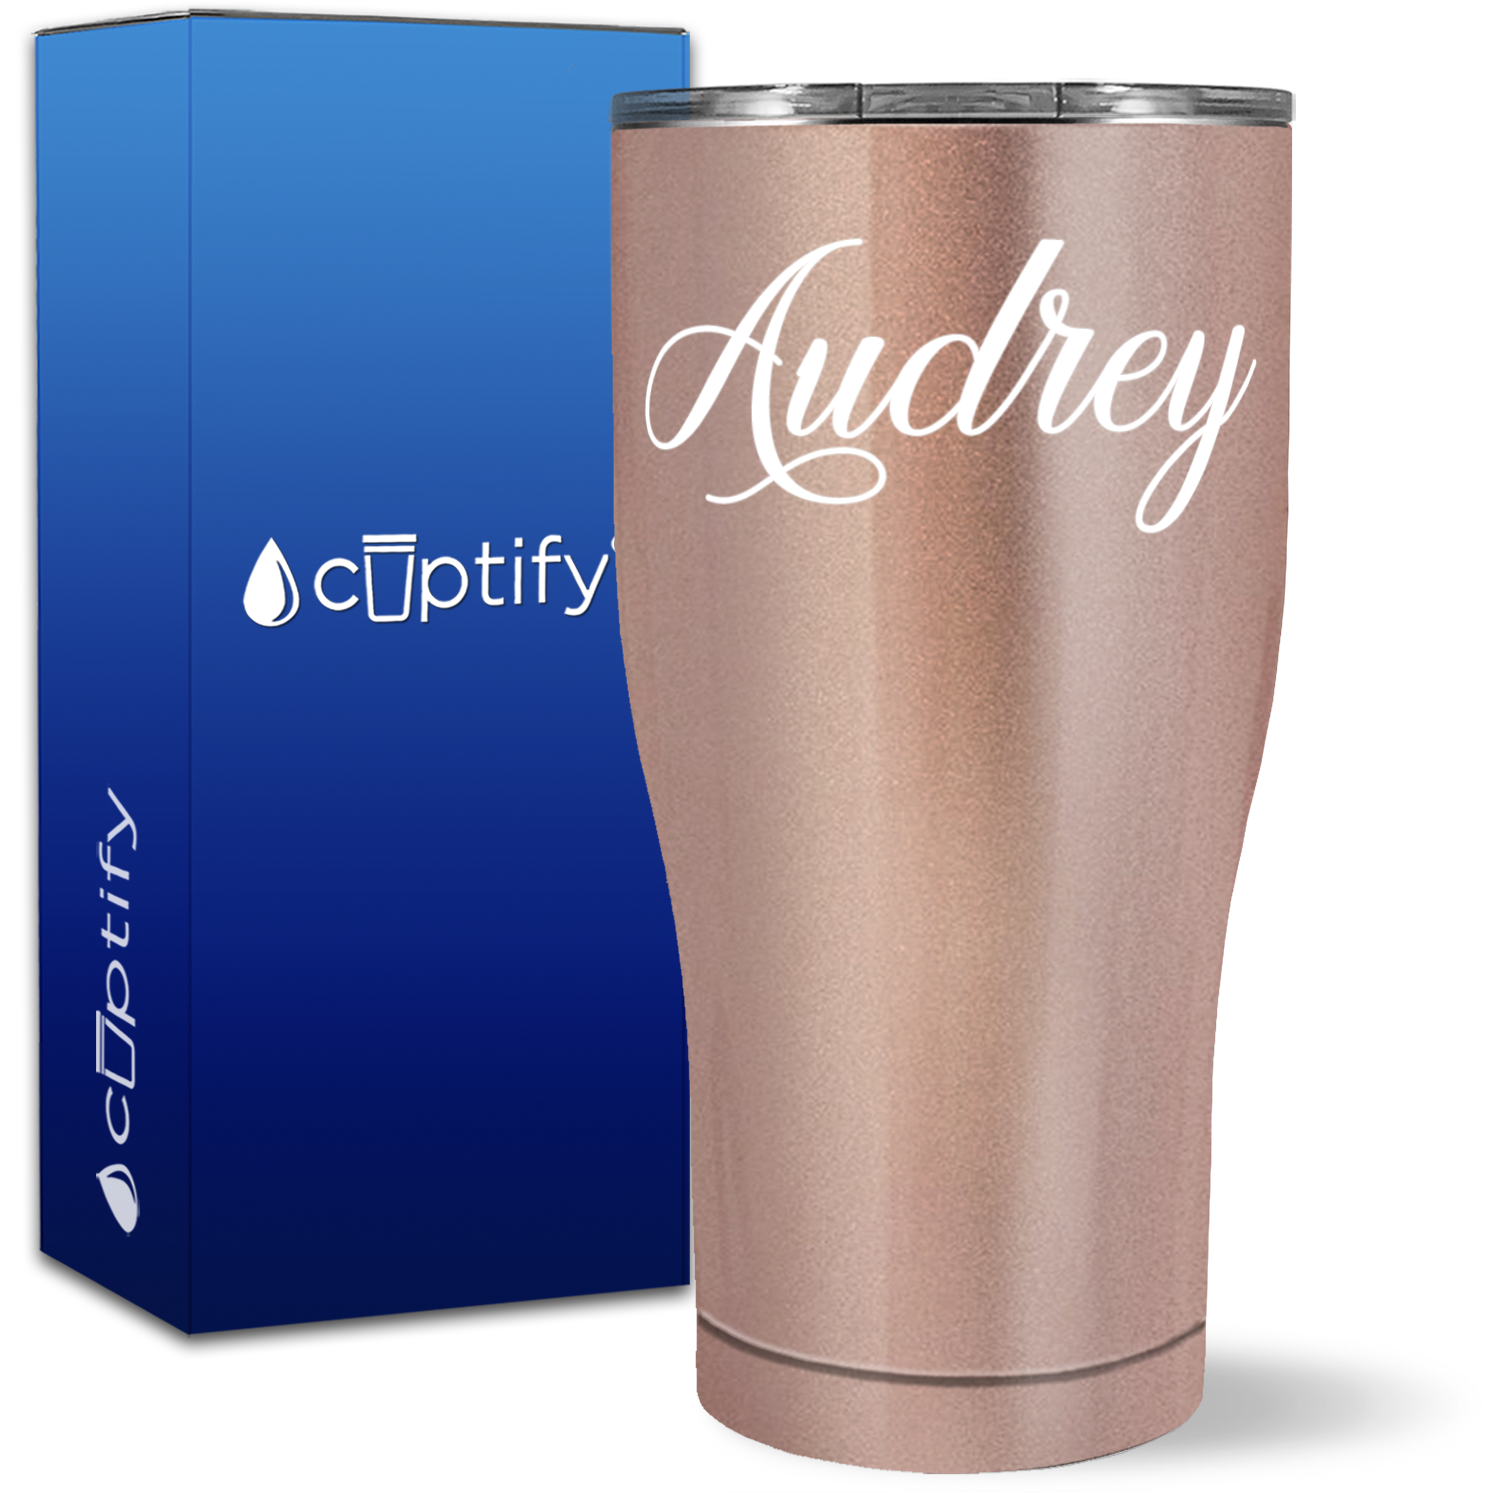 Personalized Audrey Style on 27oz Curve Tumbler